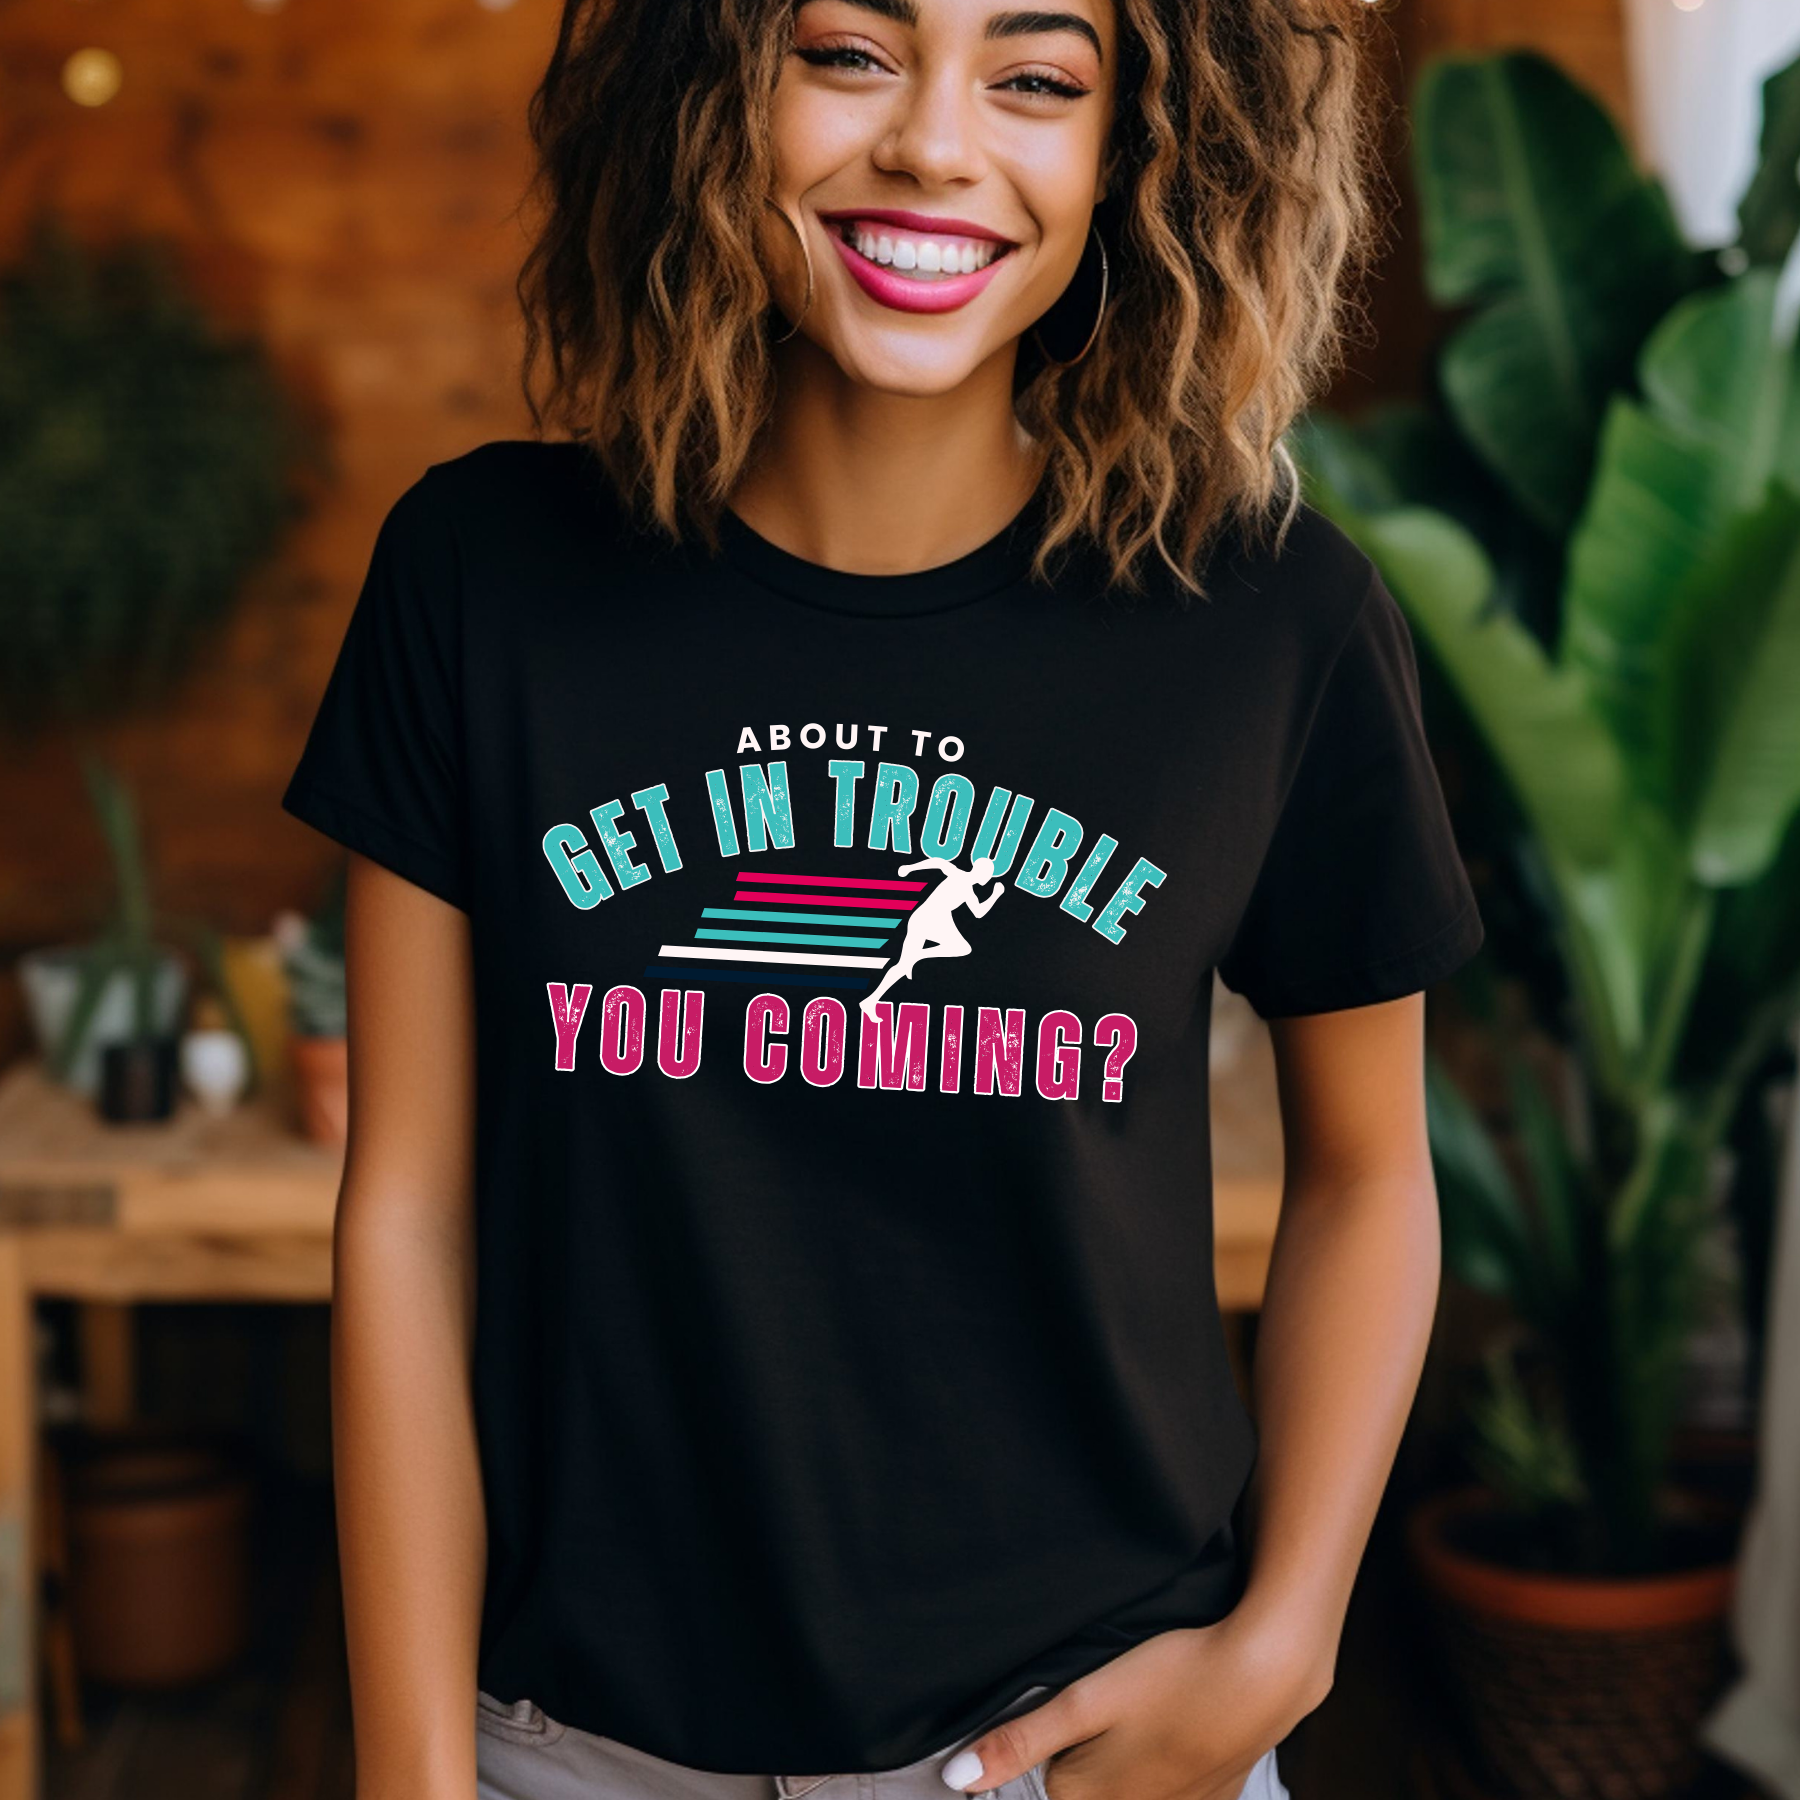 About to Get In Trouble Women's Bella Canvas T-Shirt - Eddy and Rita